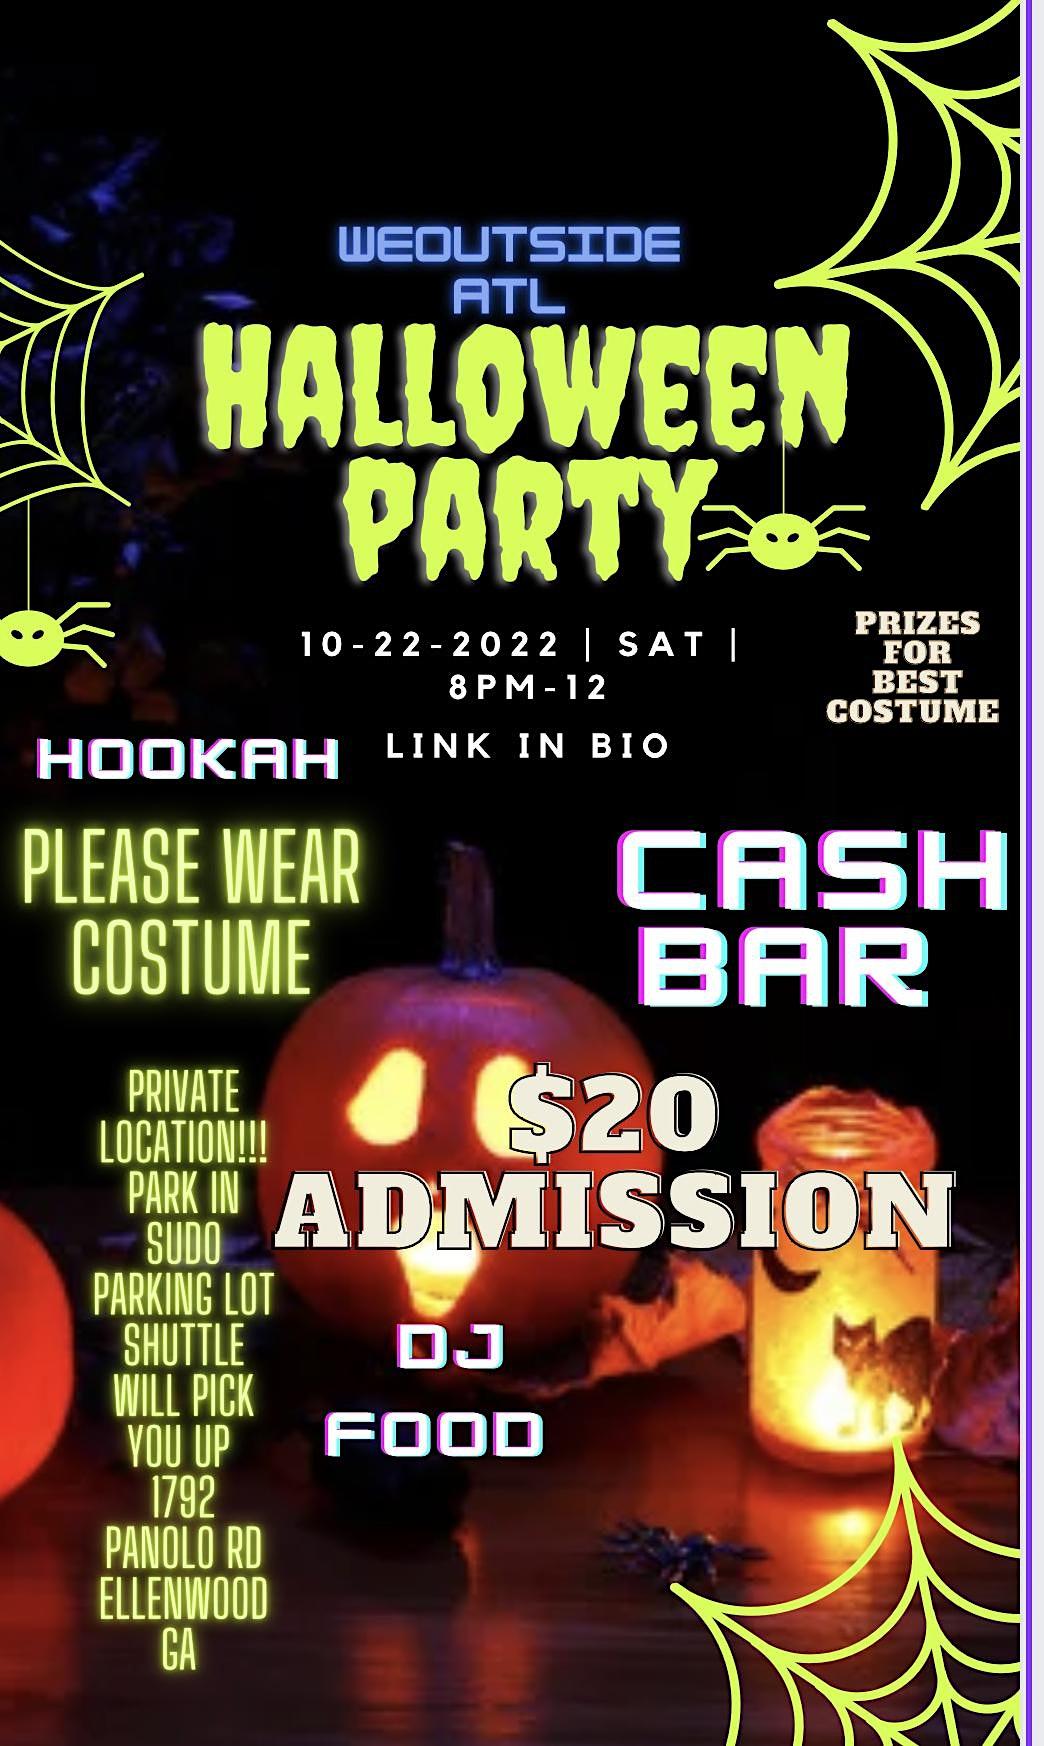 Halloween Party
Sat Oct 22, 8:00 PM - Sun Oct 23, 12:00 AM
in 2 days